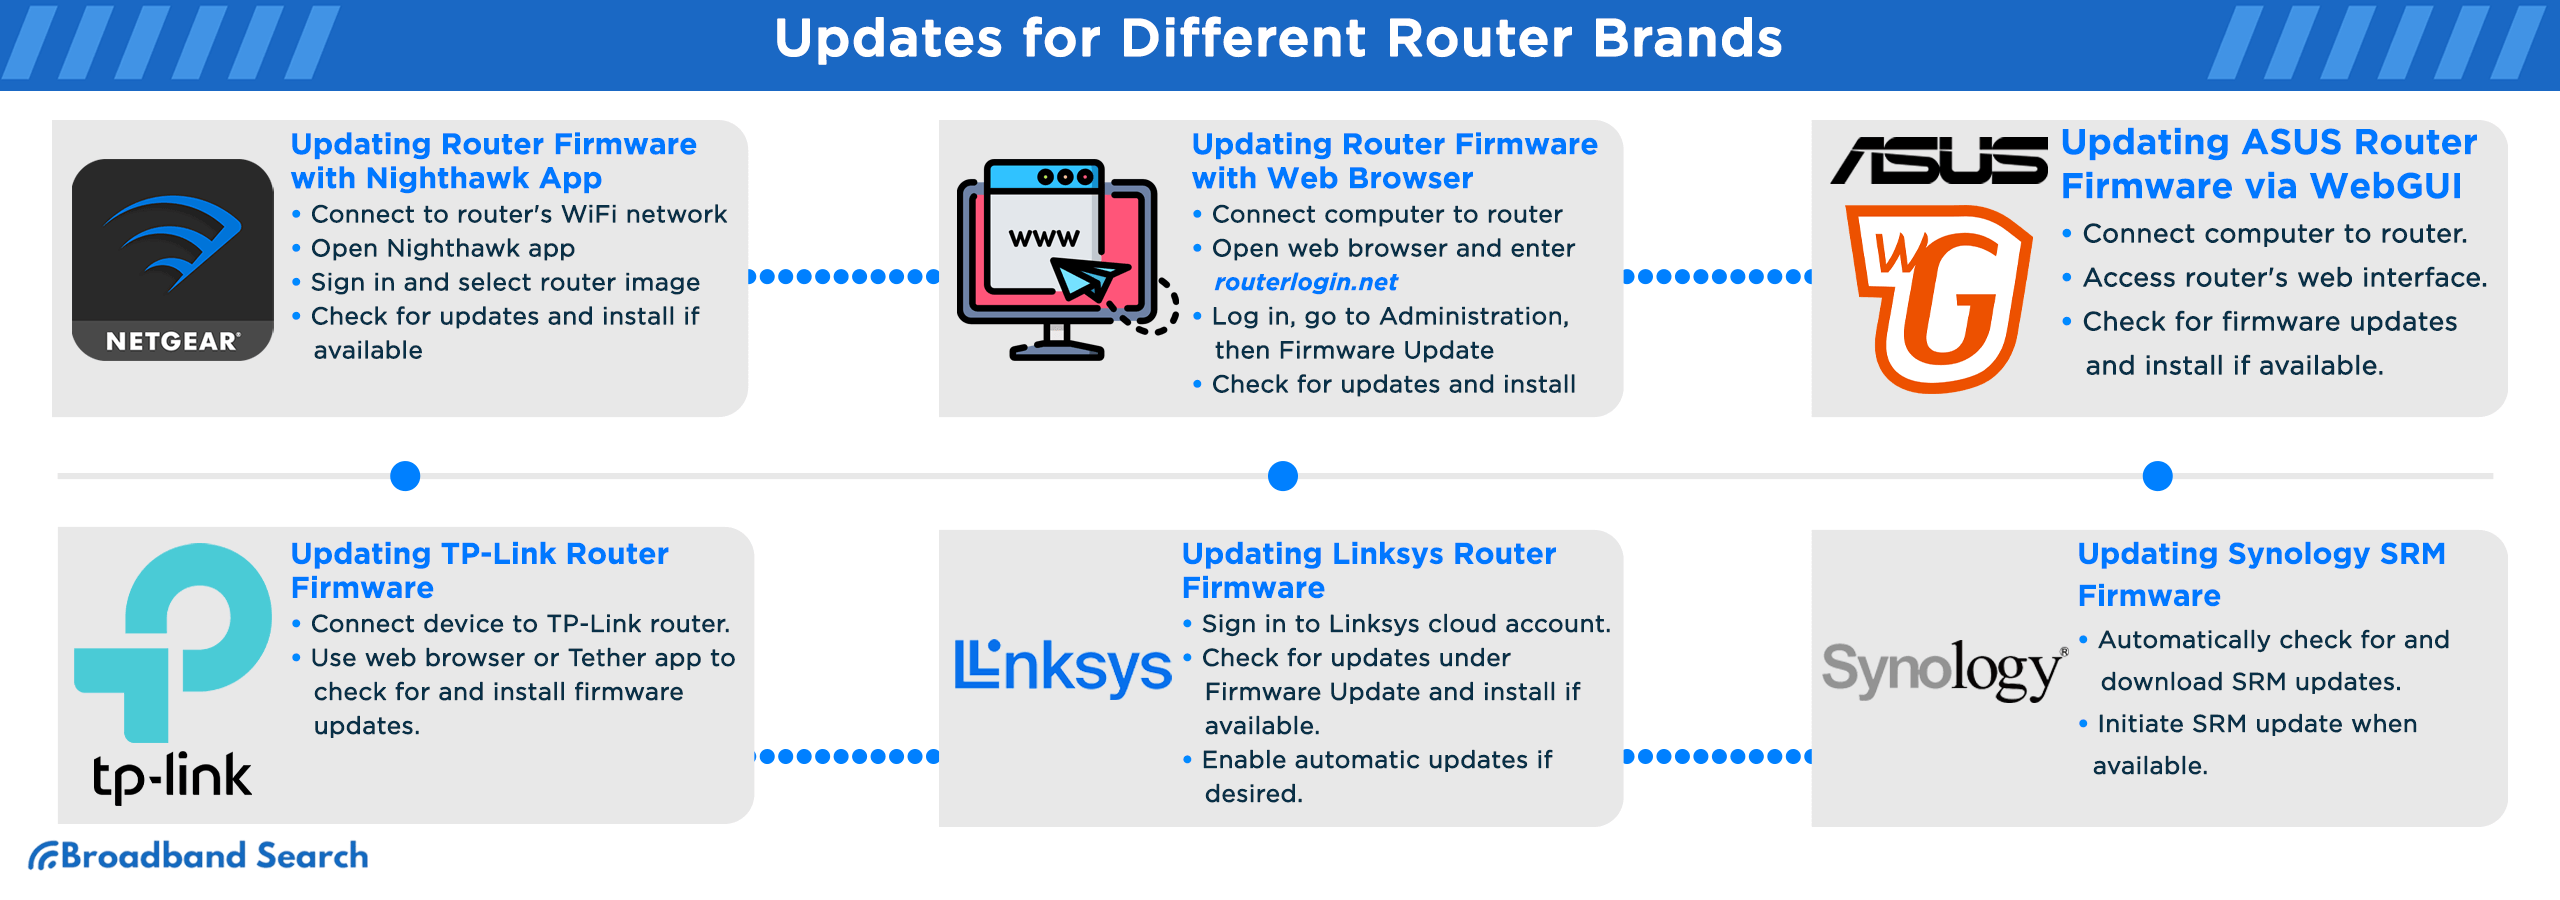 Updates for different router brands